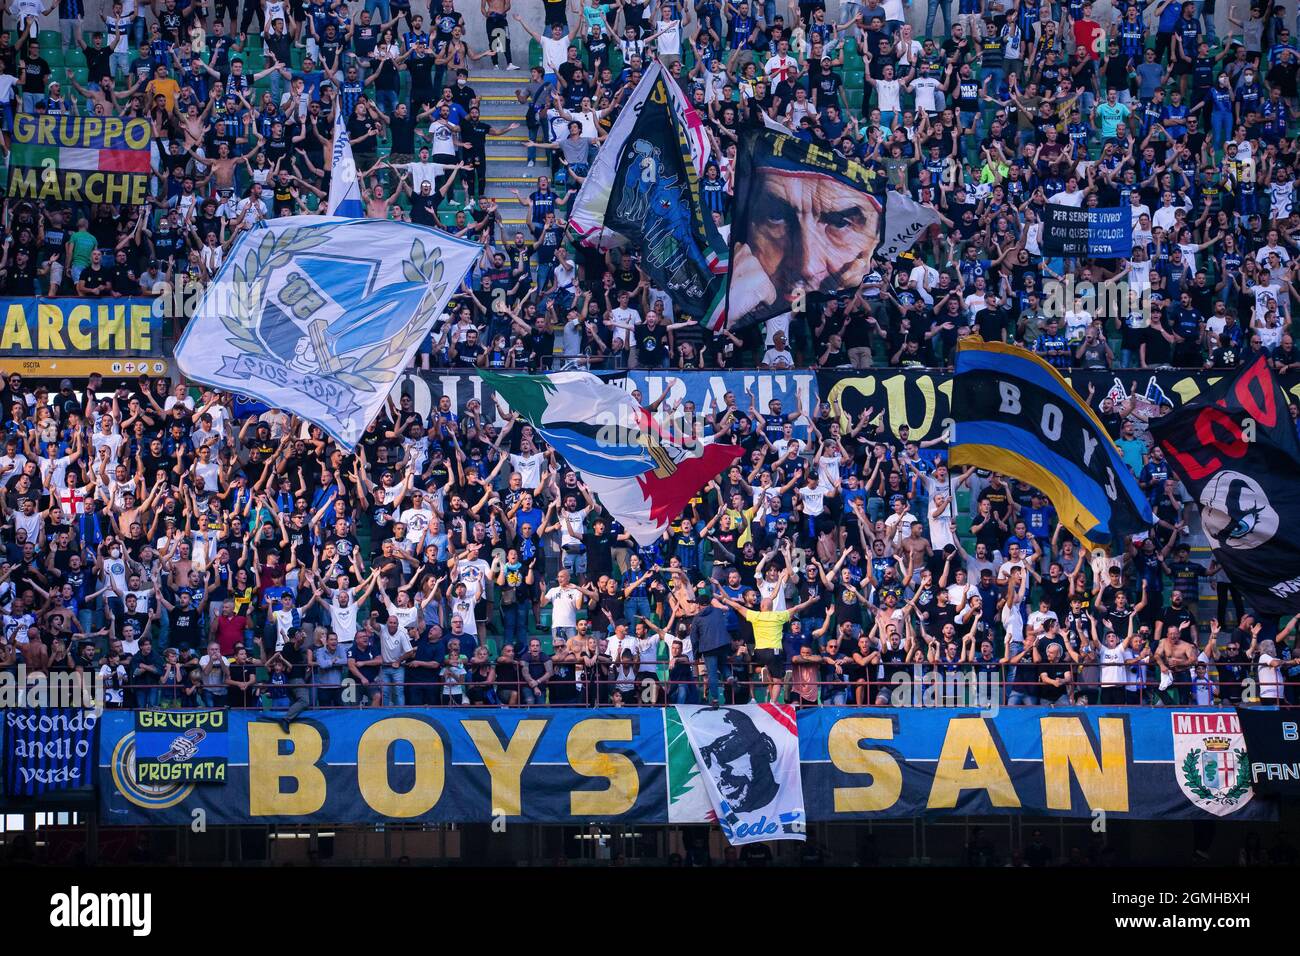 The Curva Nord has weighed in on the team’s struggles, urging to react and setting the objectives for Inter to avoid a full-fledged protest.